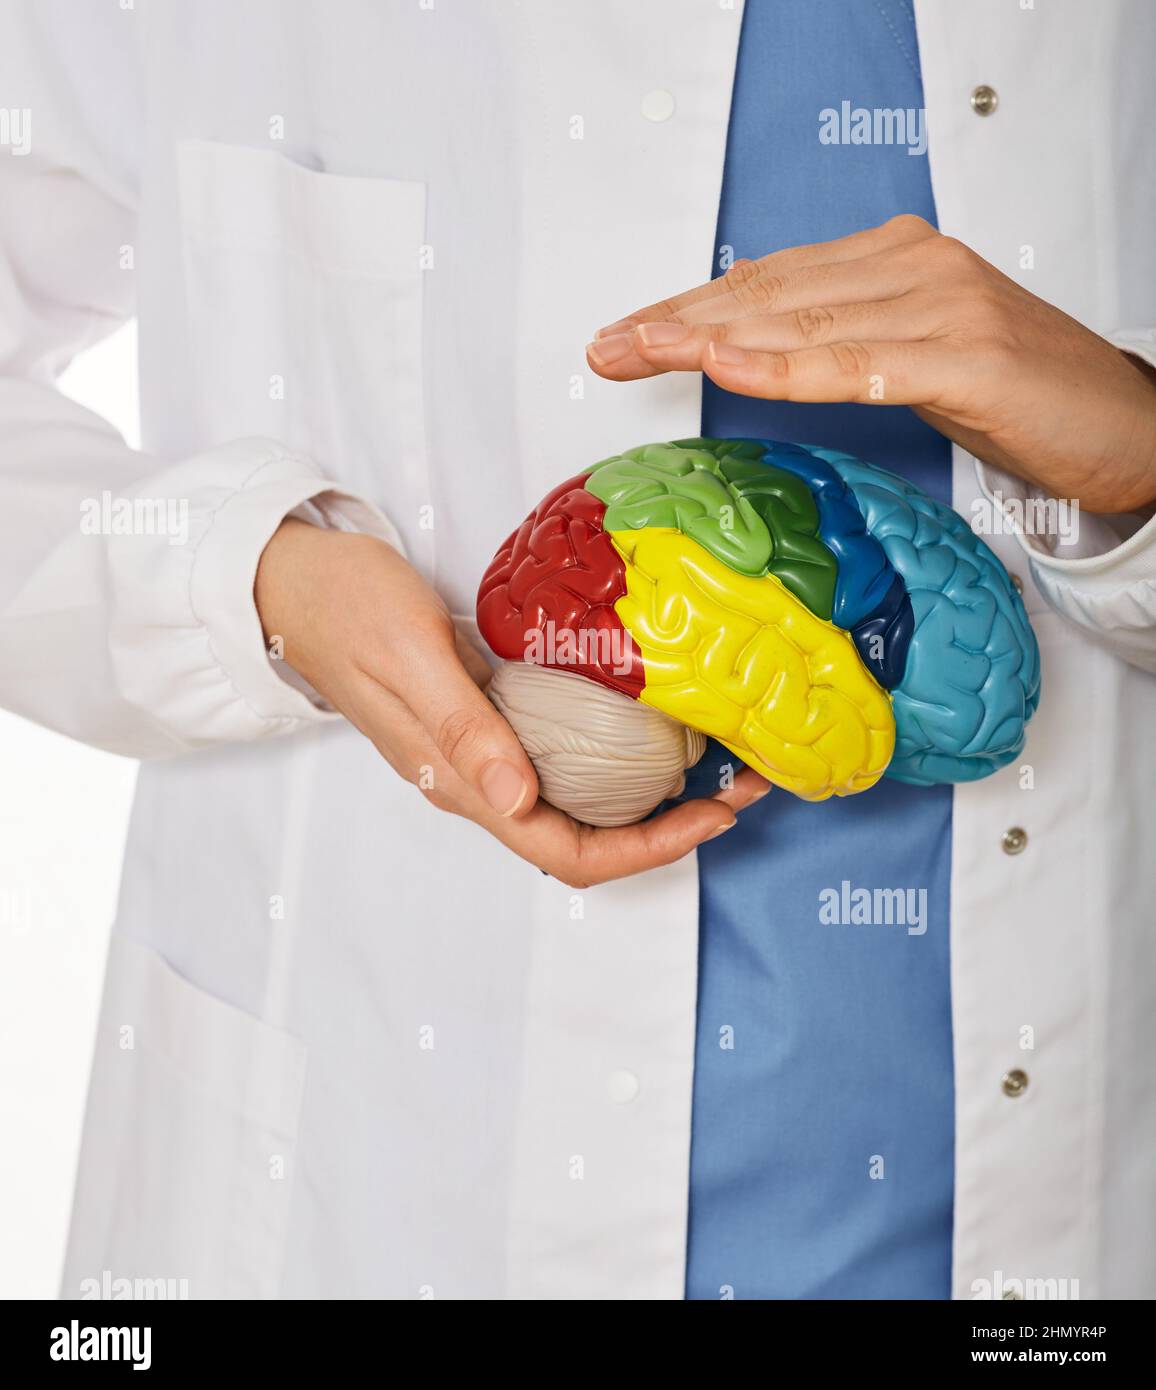 Anatomical model of human brain in doctor hands showing medical care. Diagnostics and treatment of brain diseases, headaches, and brain Stock Photo